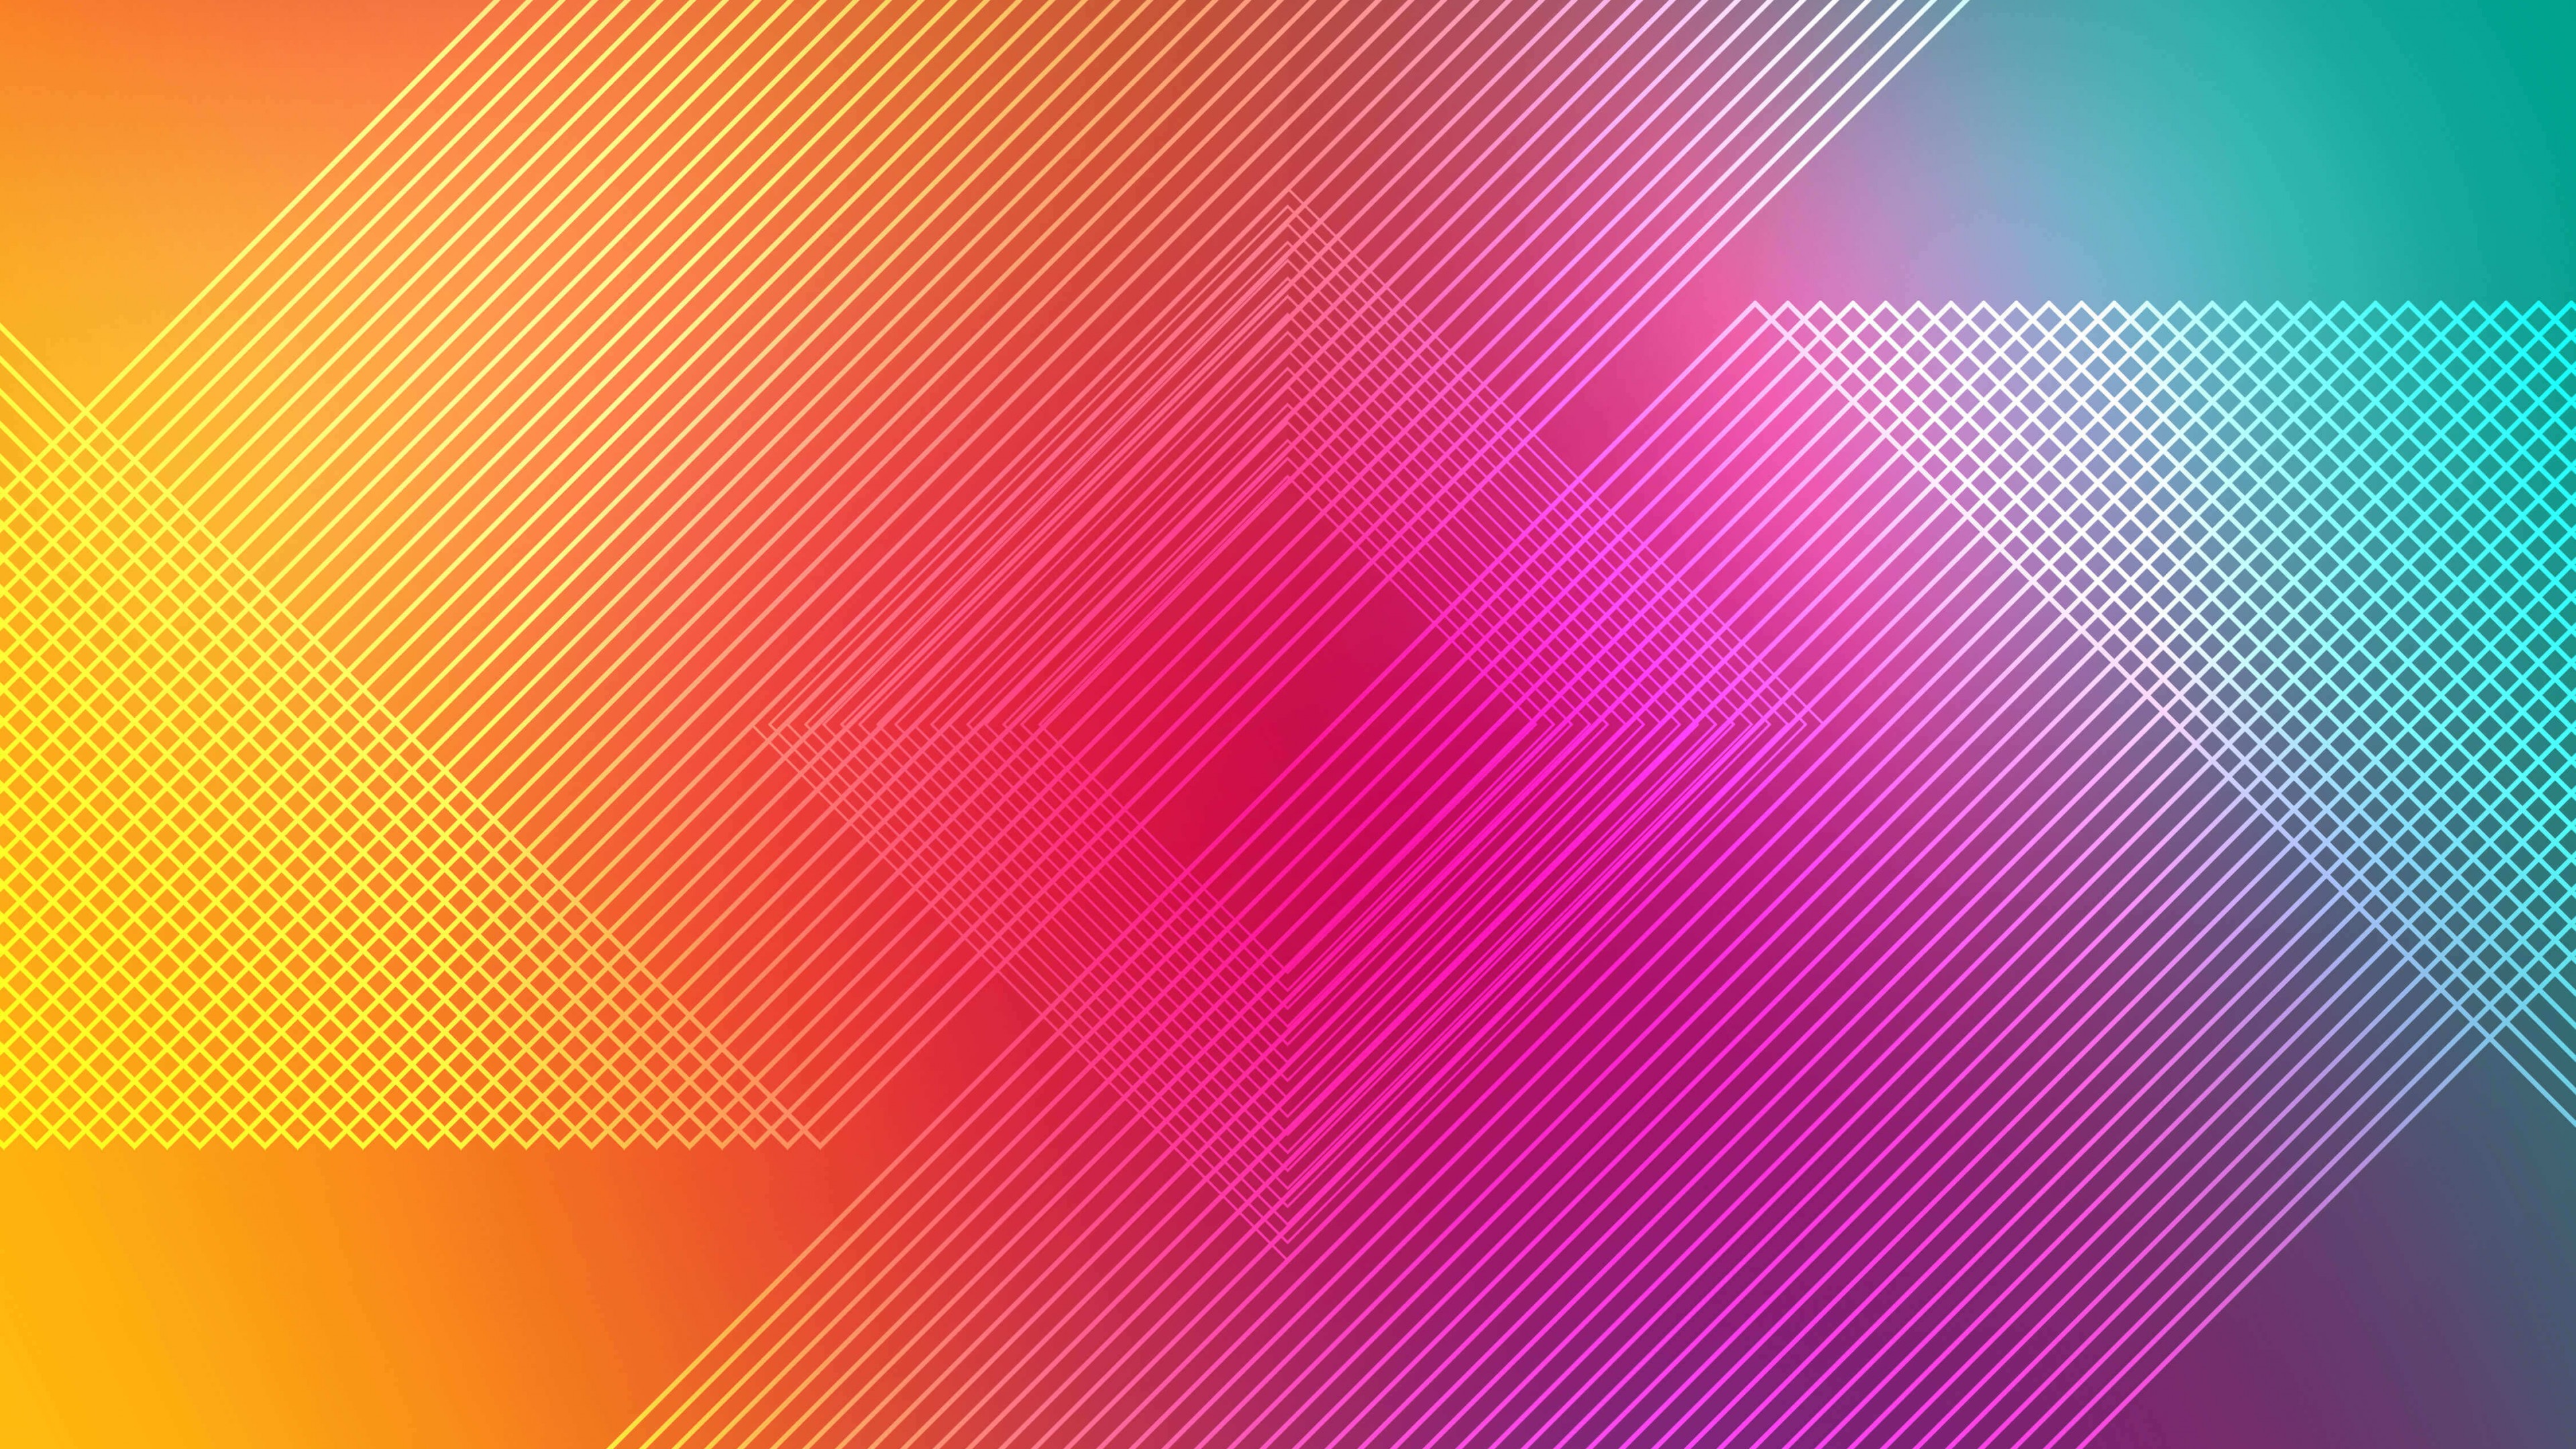 Multicolor Abstract 4k Hd Abstract 4k Wallpapers Images HD Wallpapers Download Free Map Images Wallpaper [wallpaper684.blogspot.com]